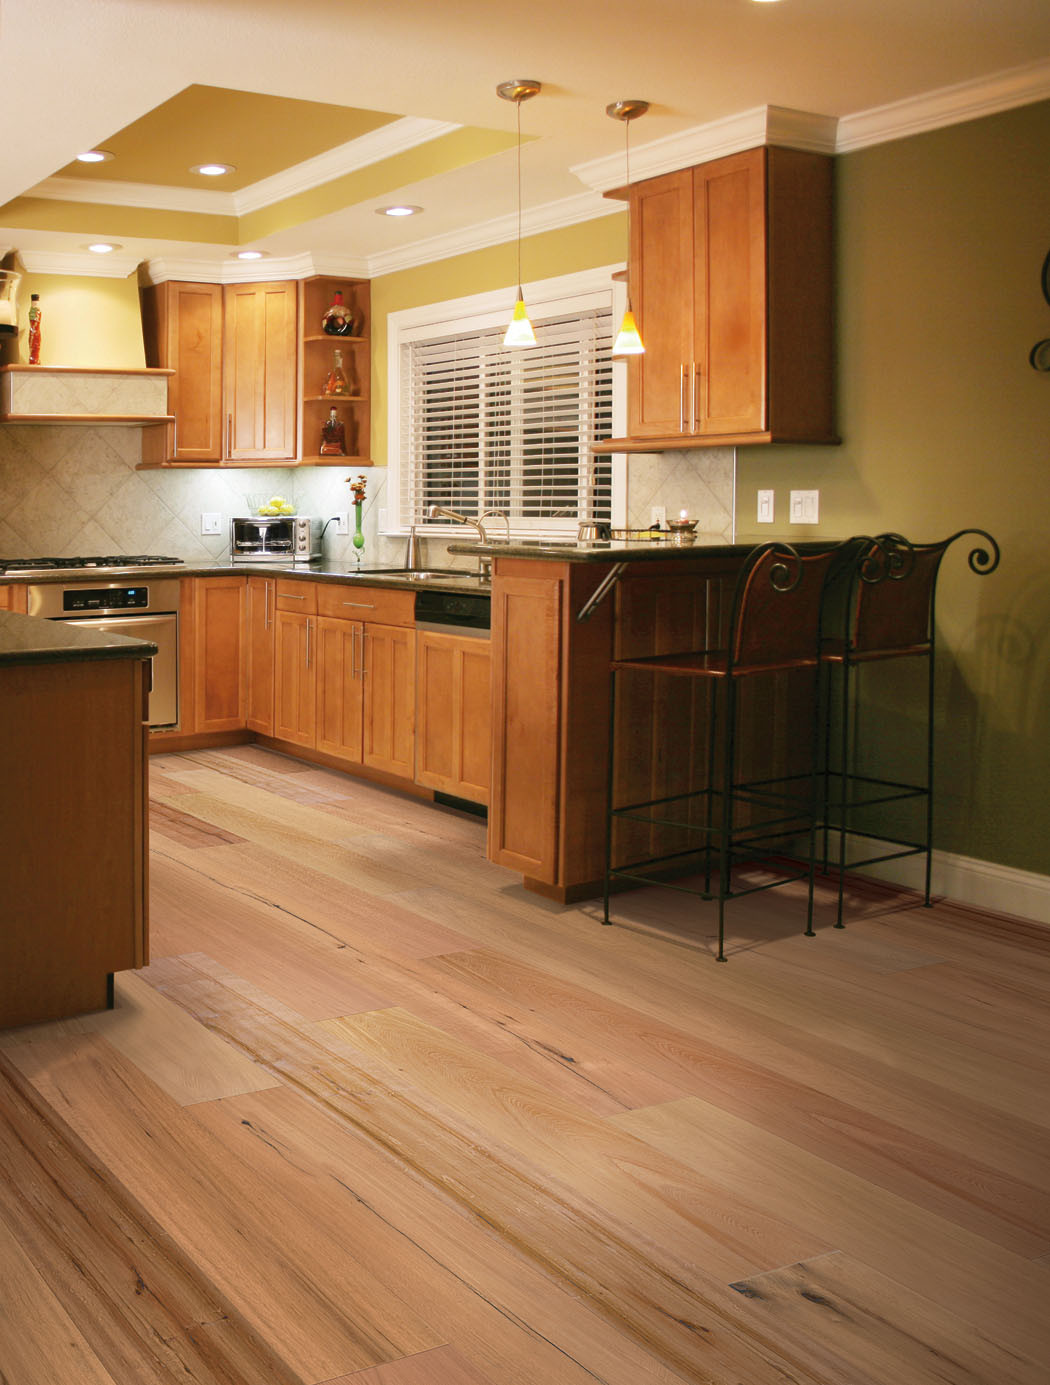 Bamboo Kitchen Flooring
 10 Bamboo Hardwood Flooring Ideas For Your Home